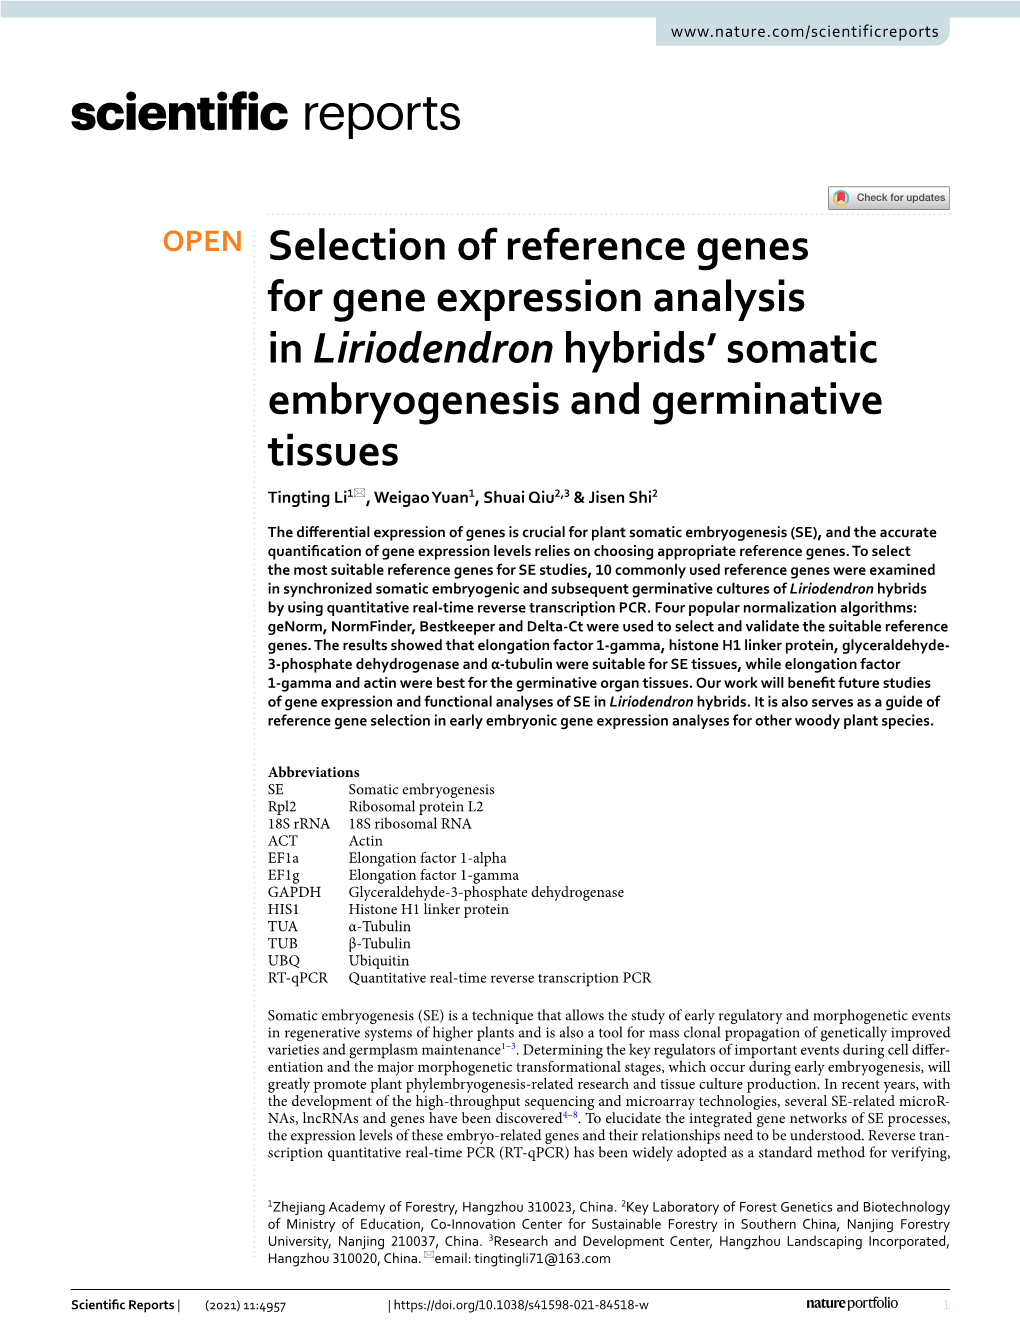 Selection of Reference Genes for Gene Expression Analysis in Liriodendron